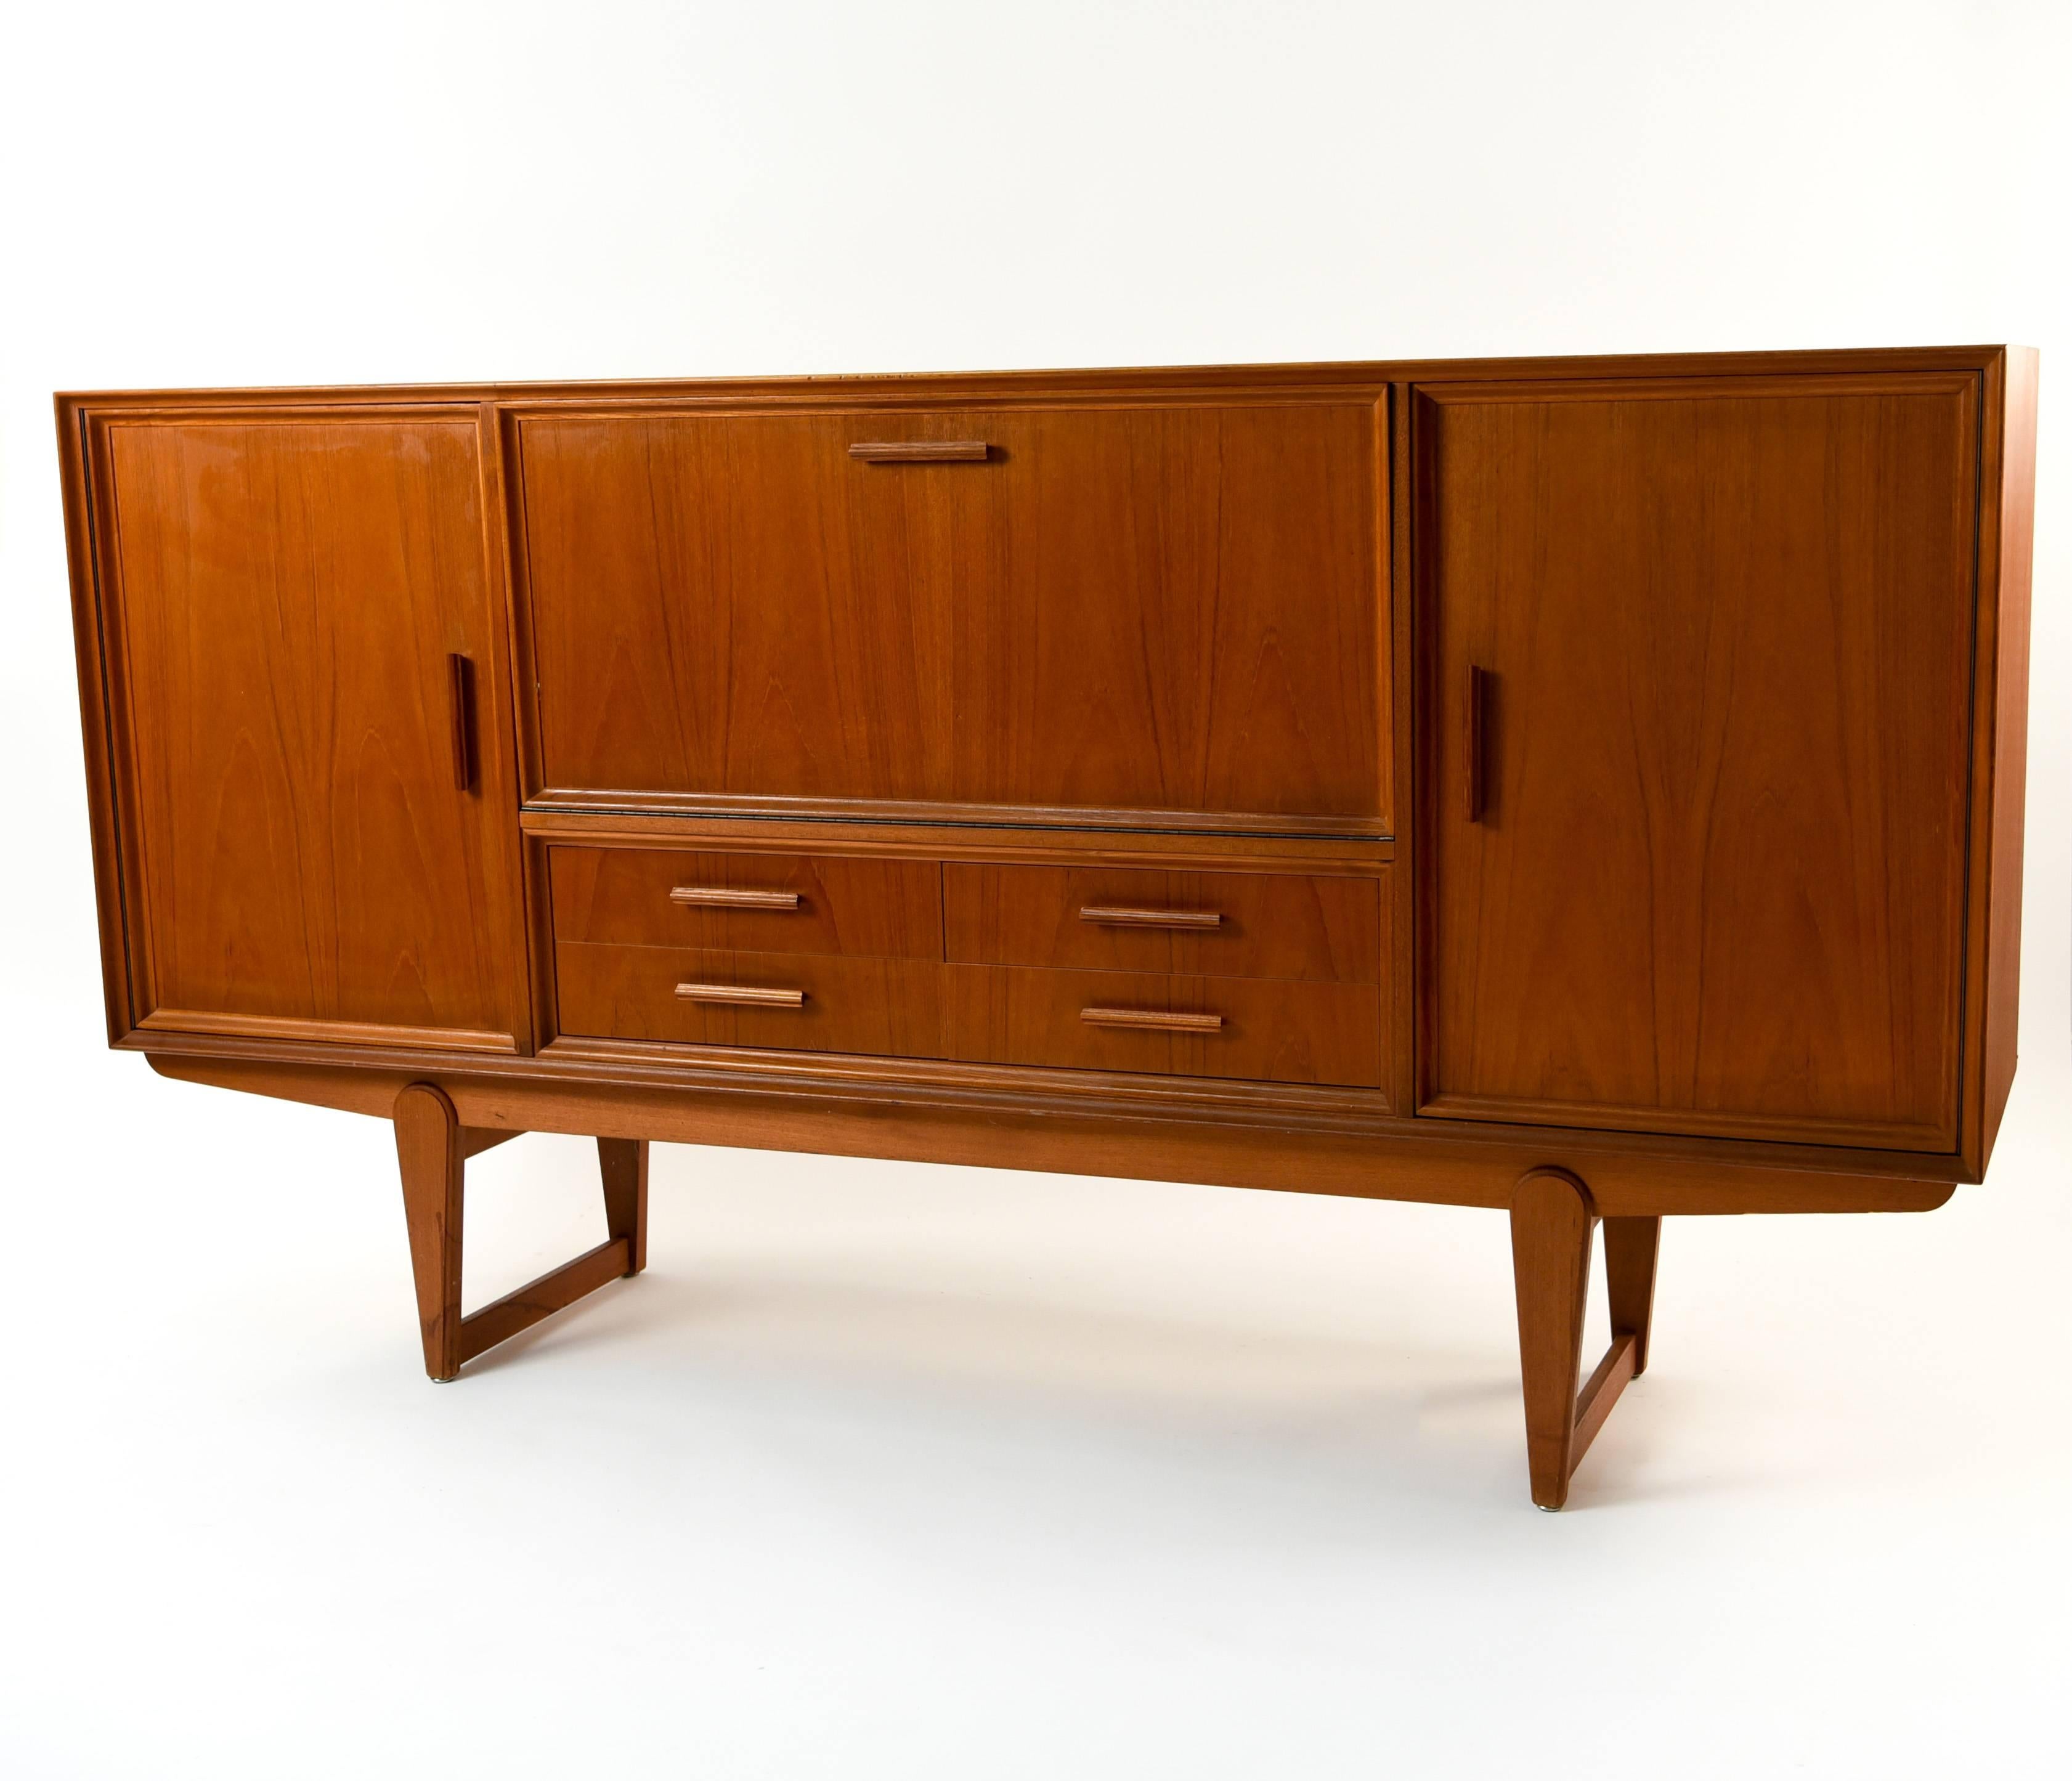 This Danish midcentury teak sideboard is full of functional, convenient storage compartments. The balanced layout of the drawers adds to the sturdy appearance.